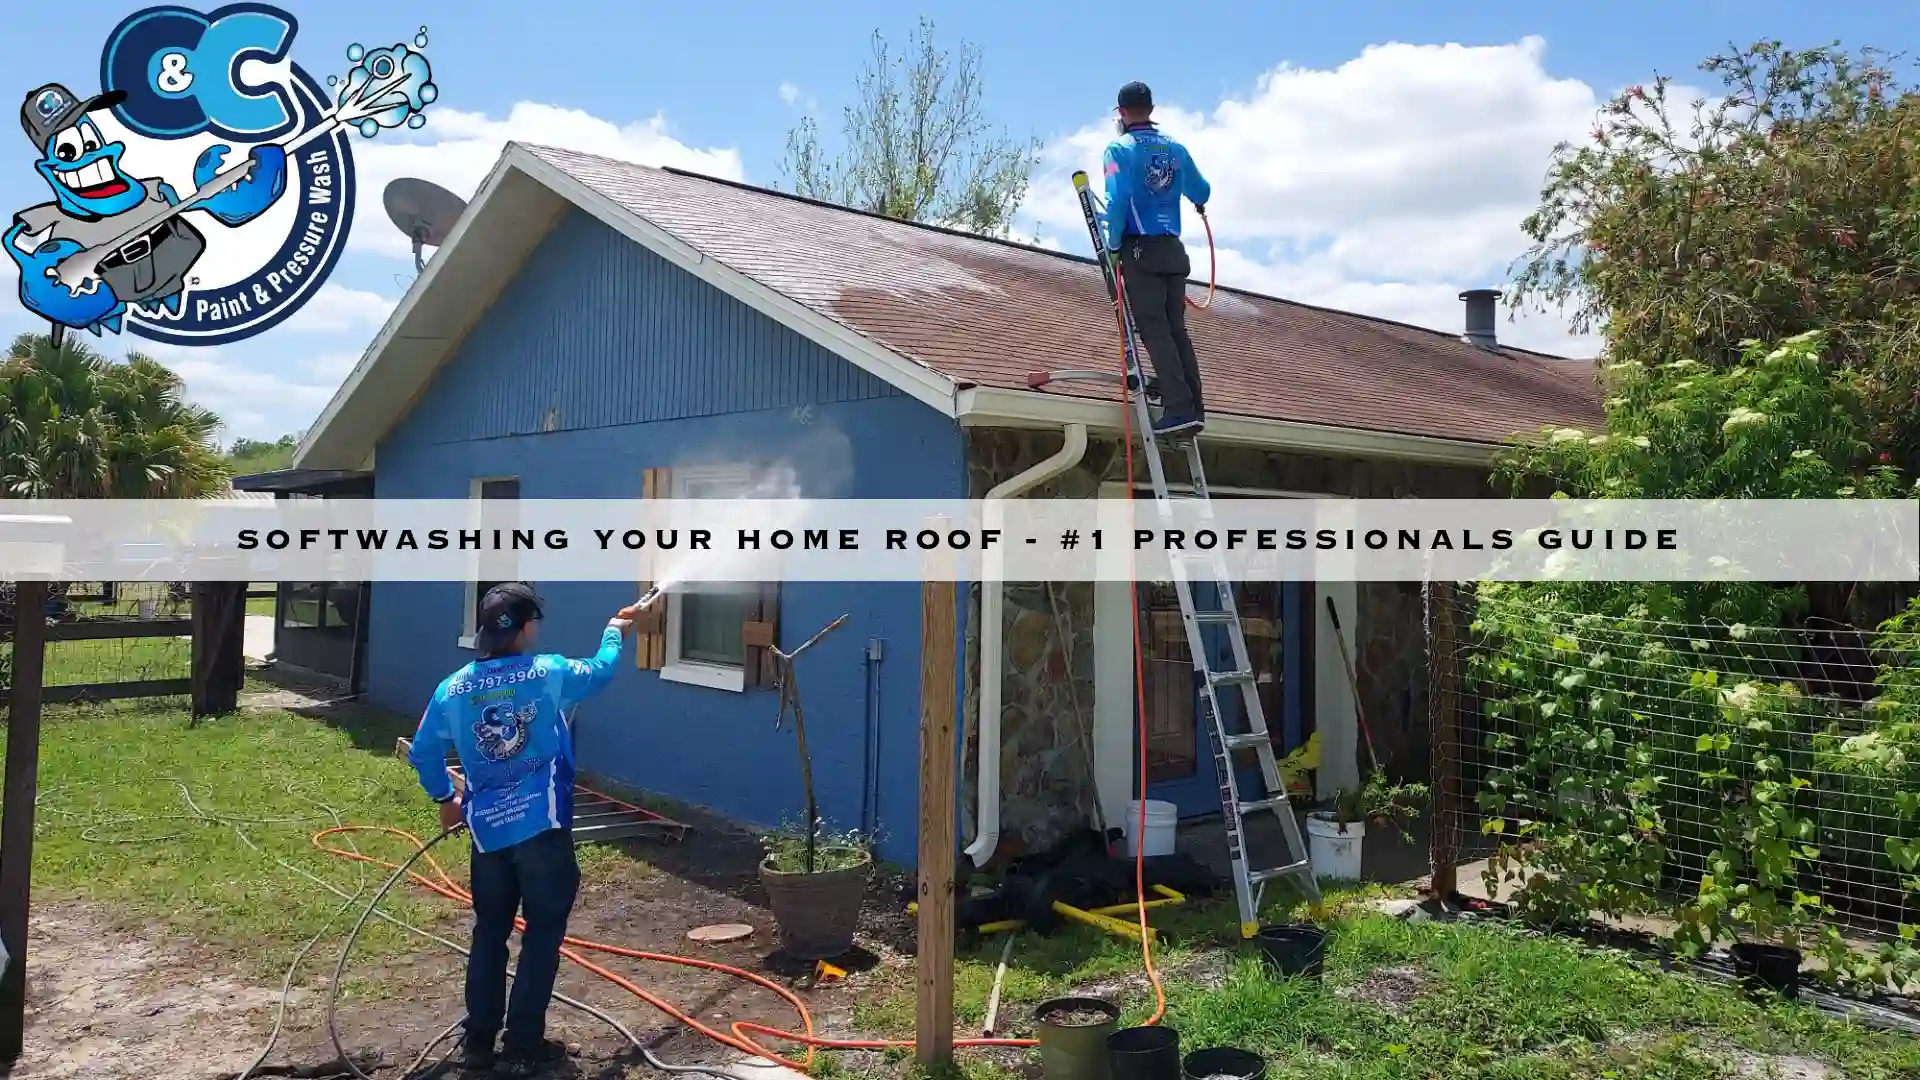 Softwashing Your Home Roof - #1 Professionals Guide